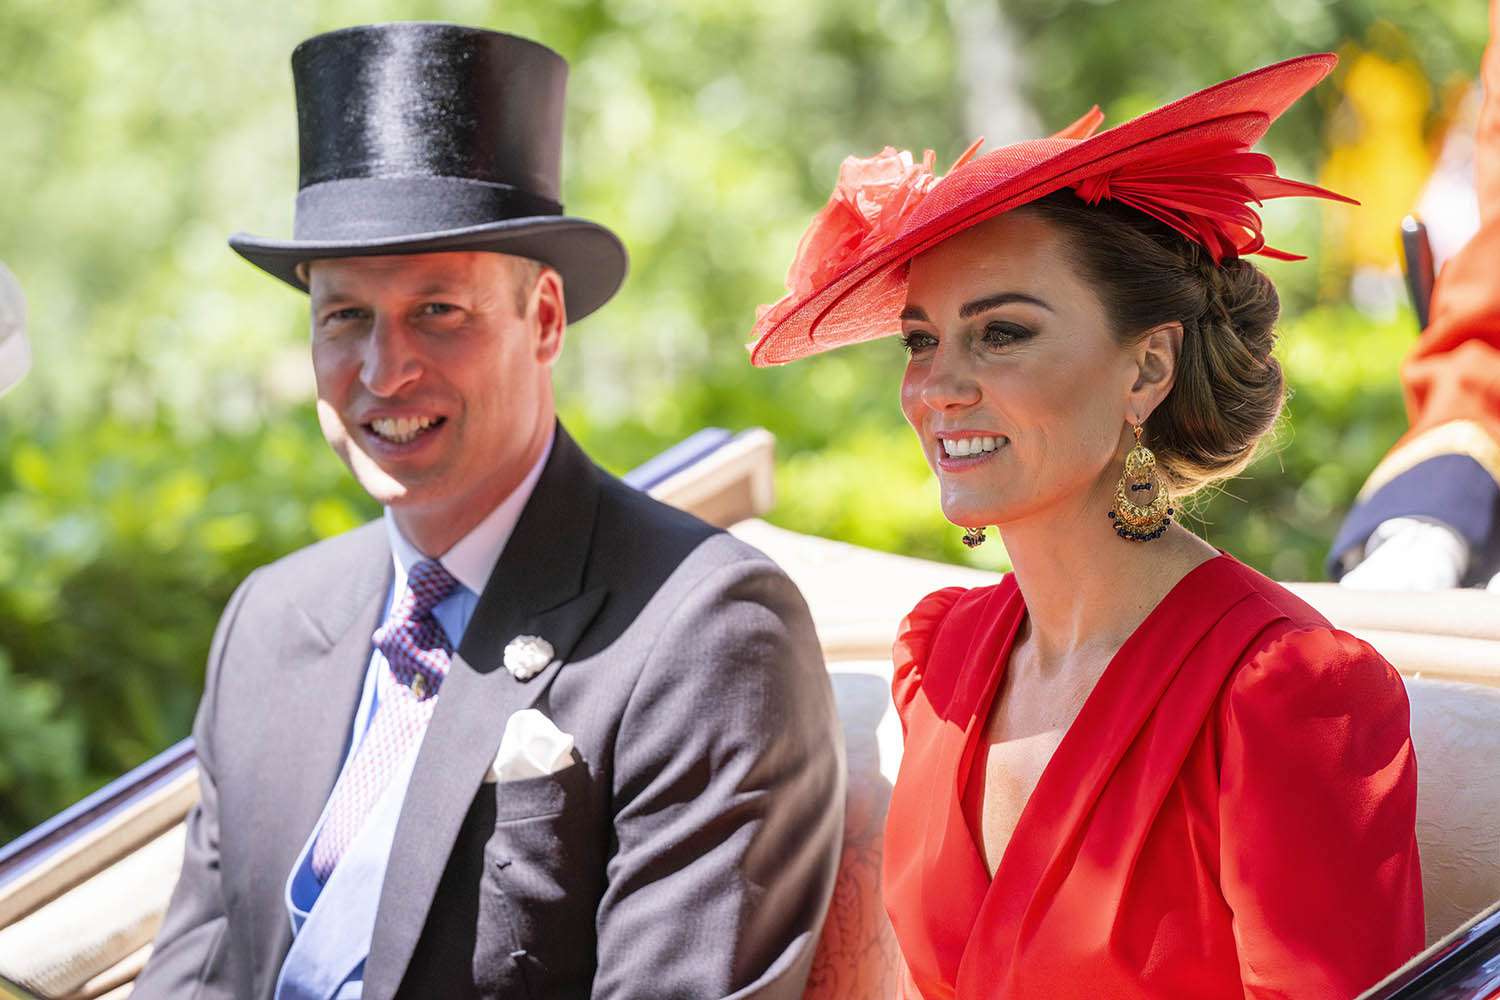 Members of the British Royal Family arrive in carriages to Day 4 of The Royal Ascot Races